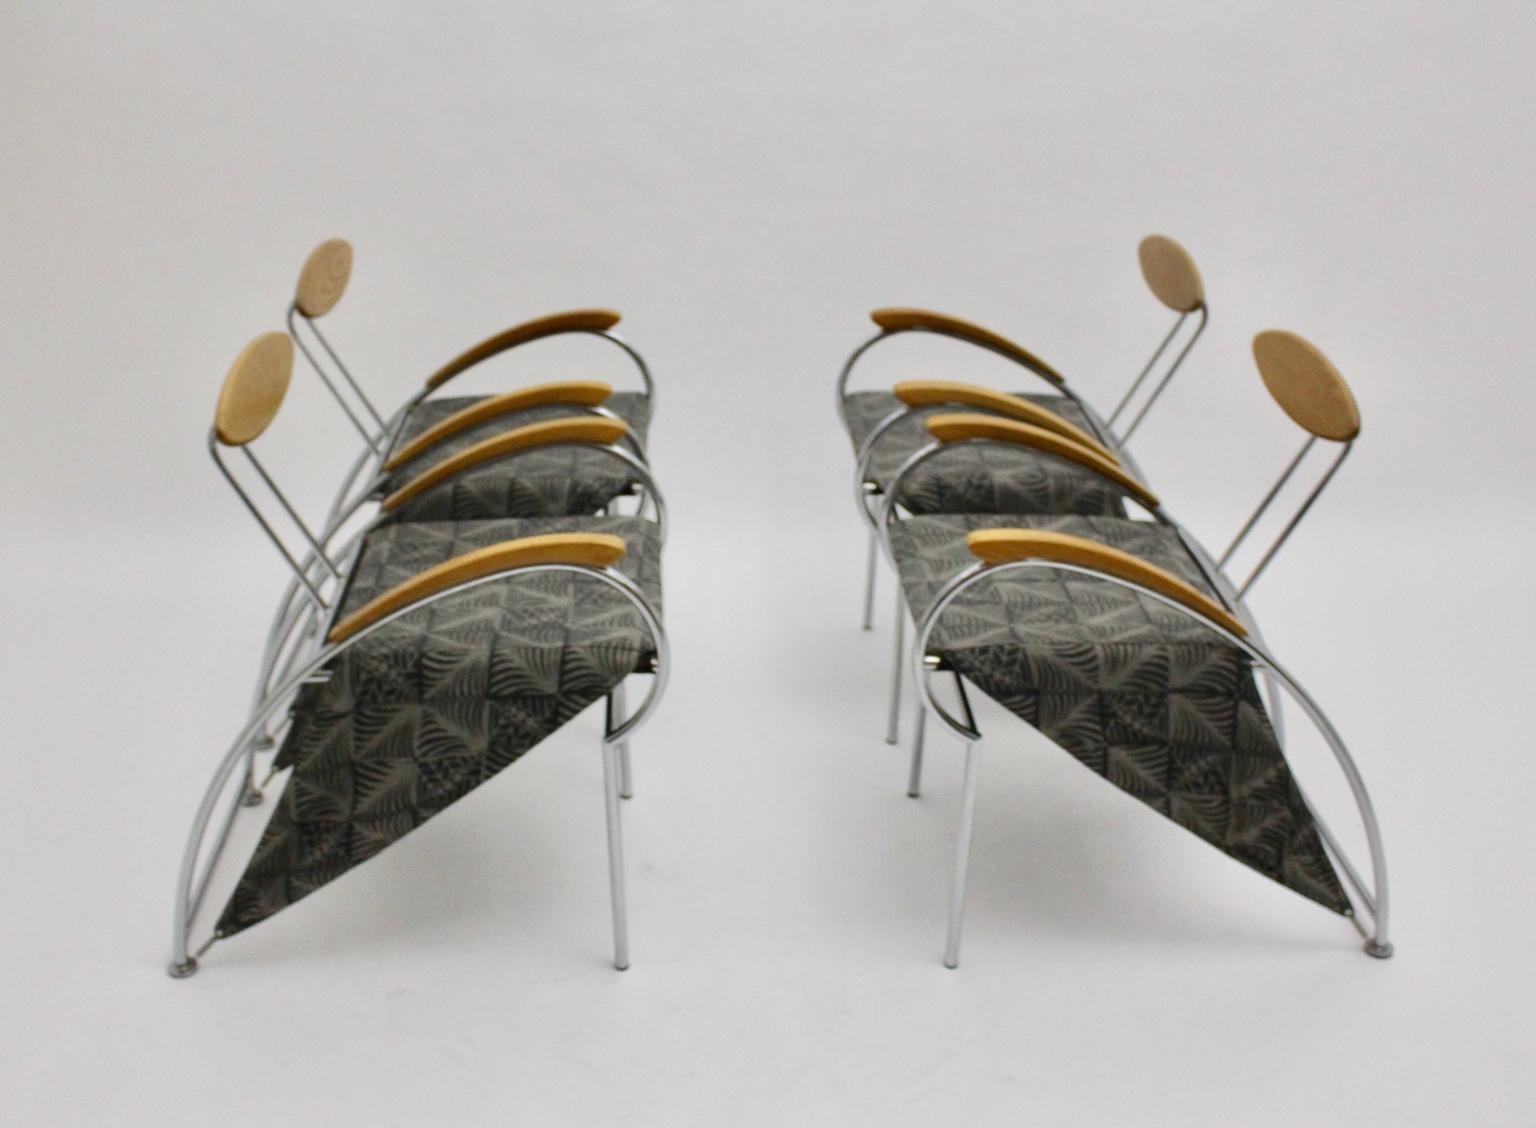 Postmodern Set of Four Vintage Dining Chair Massimo Iosa Ghini Moroso 1988 Italy For Sale 2